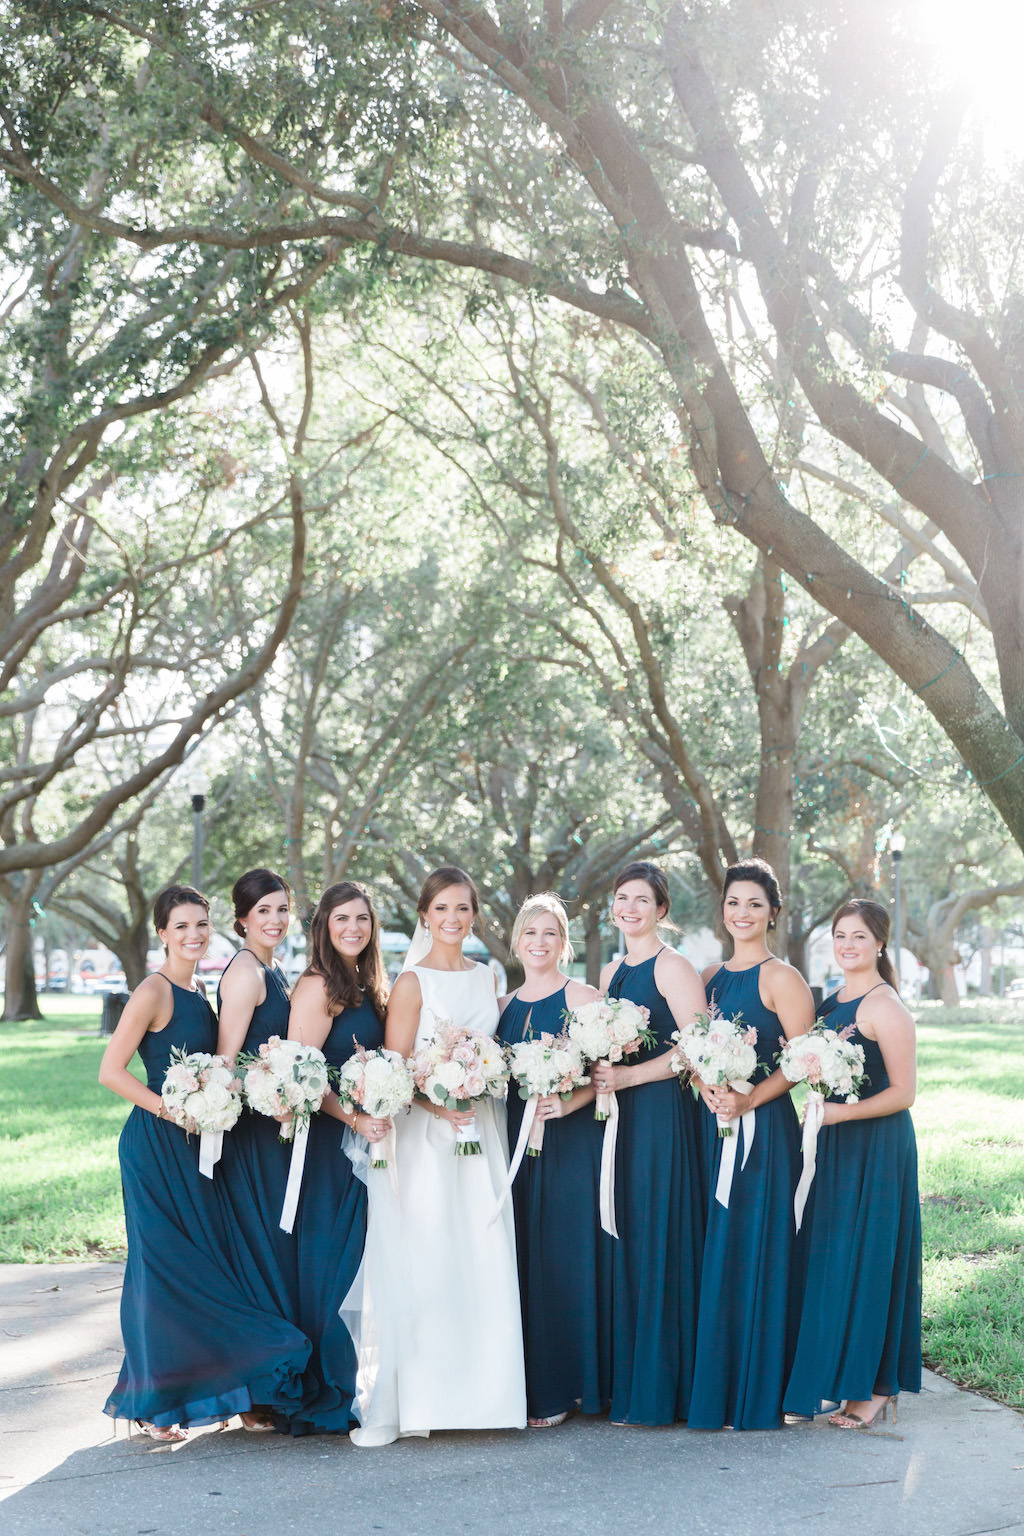 Outdoor Park Bridal Party Portrait, Bridesmaids in Floorlength Azazie Matching Halter Blue Dresses with White and BLush Pink Bouquets with Long RIbbon